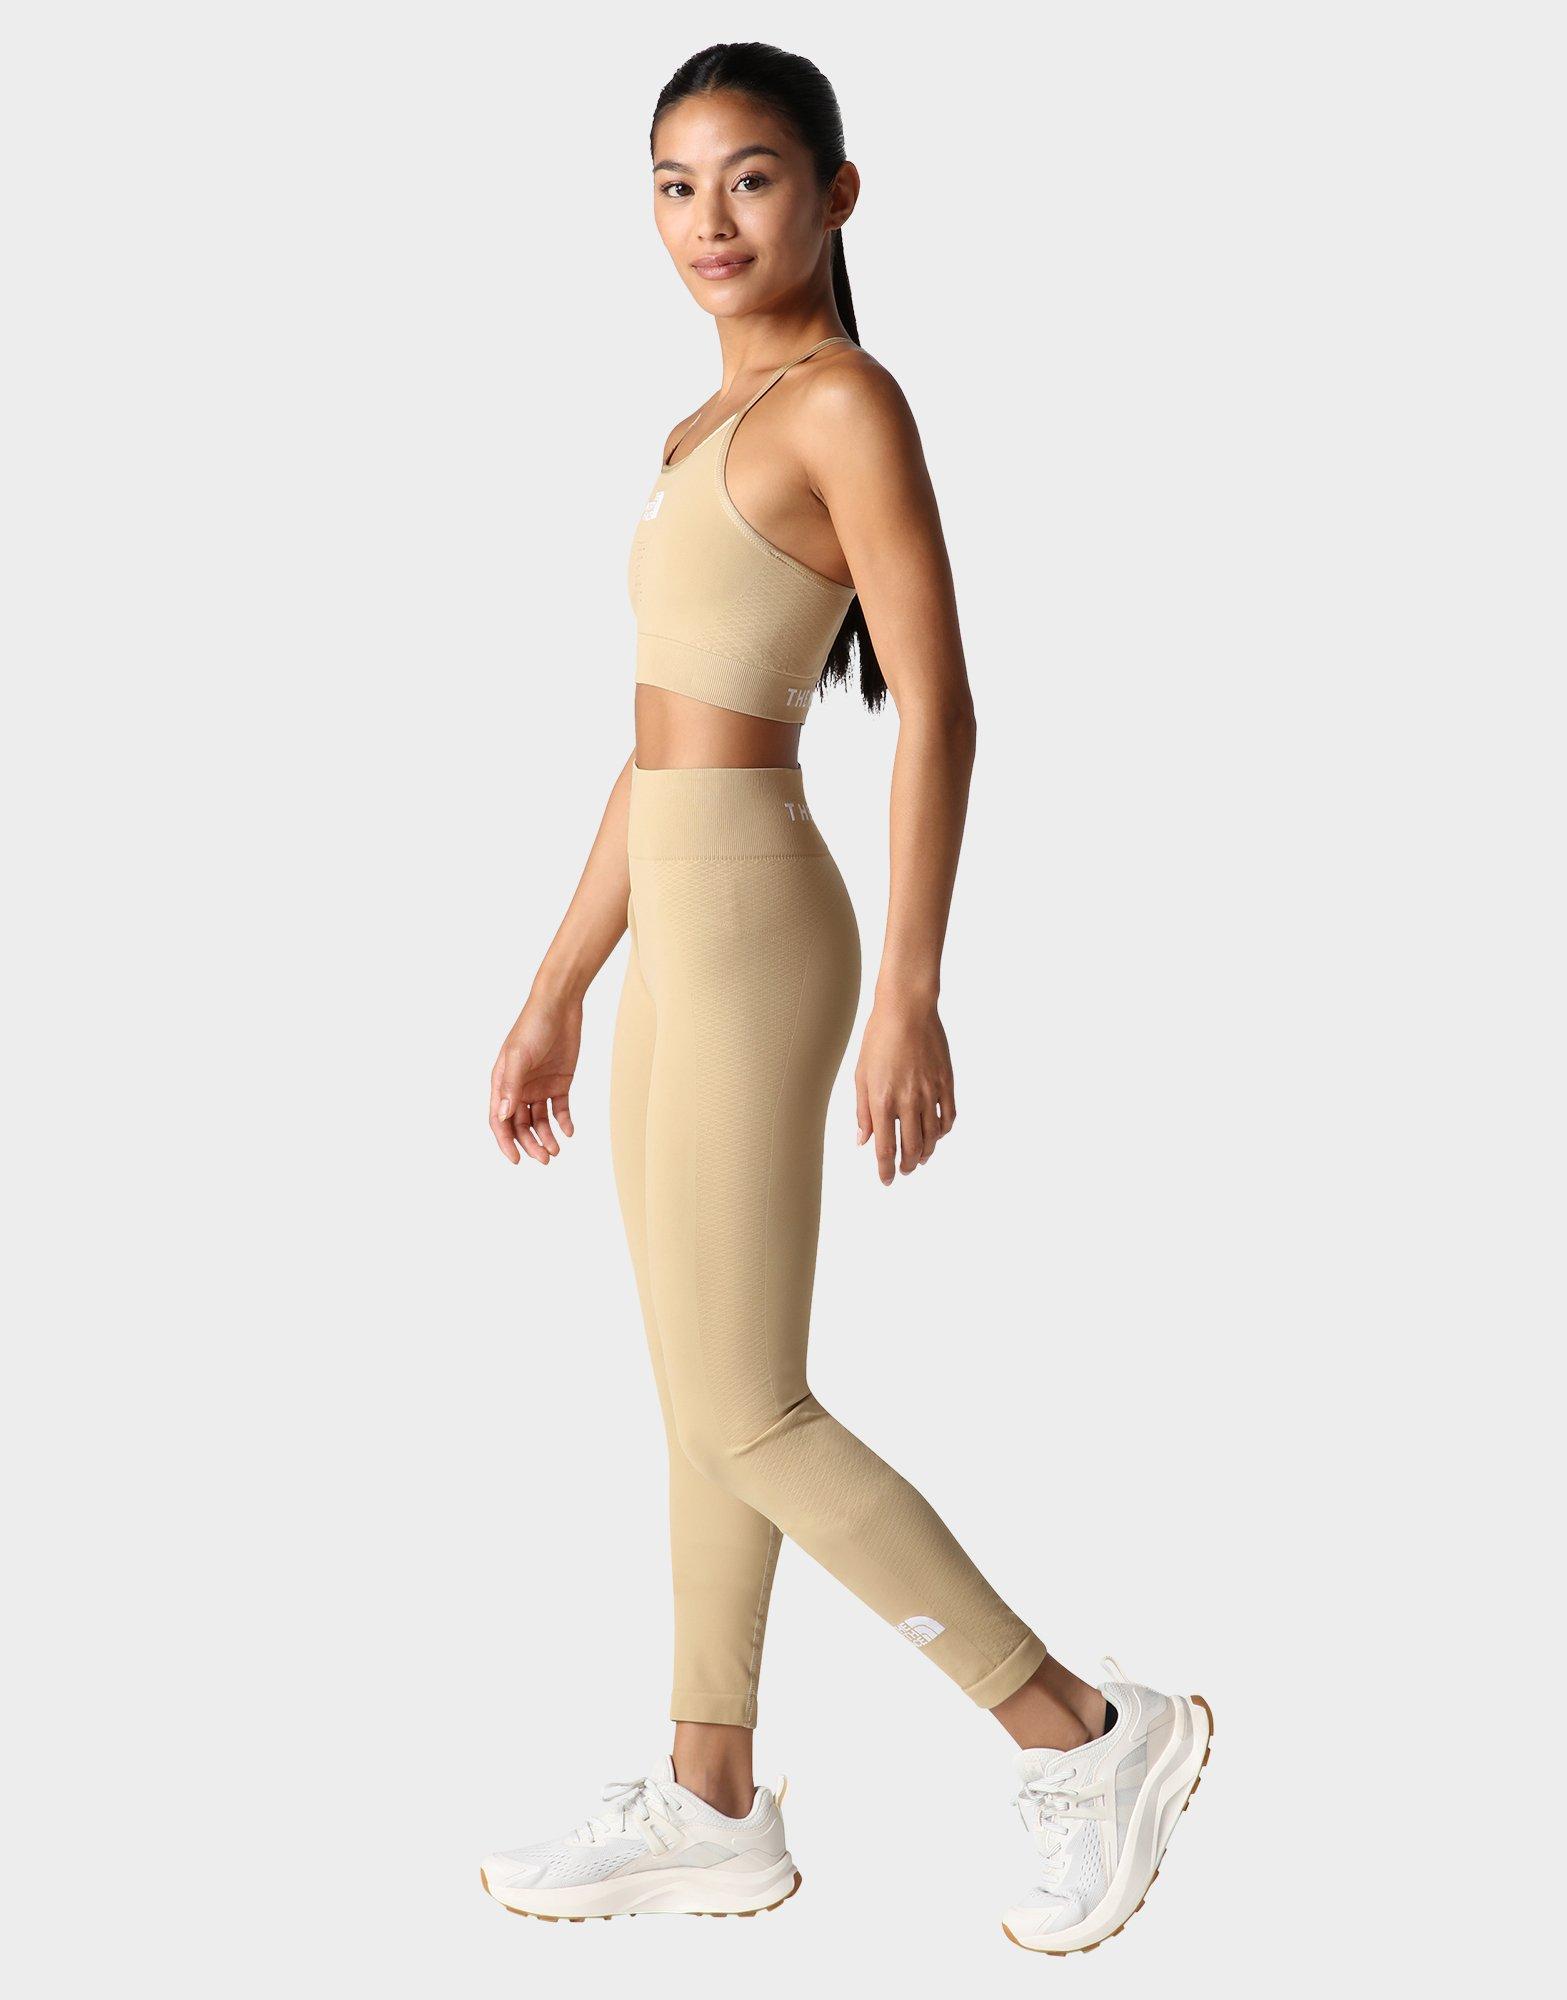 The North Face Seamless Tights